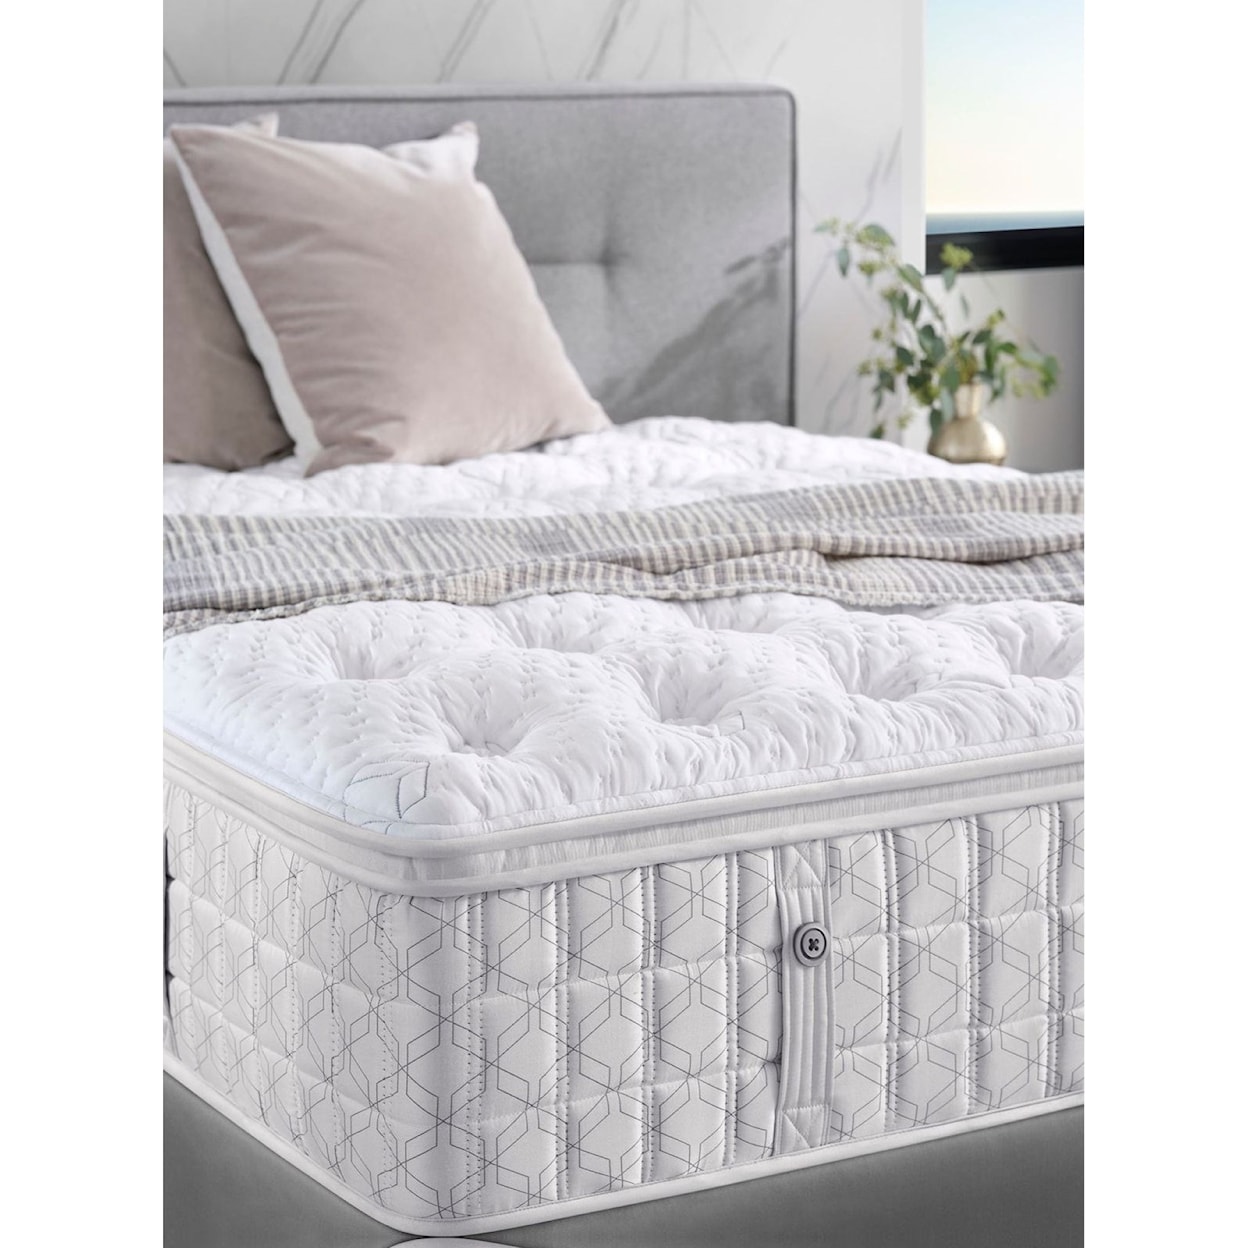 Aireloom Bedding Timeless Odyssey Luxetop Firm M2 Twin Luxury Firm Mattress